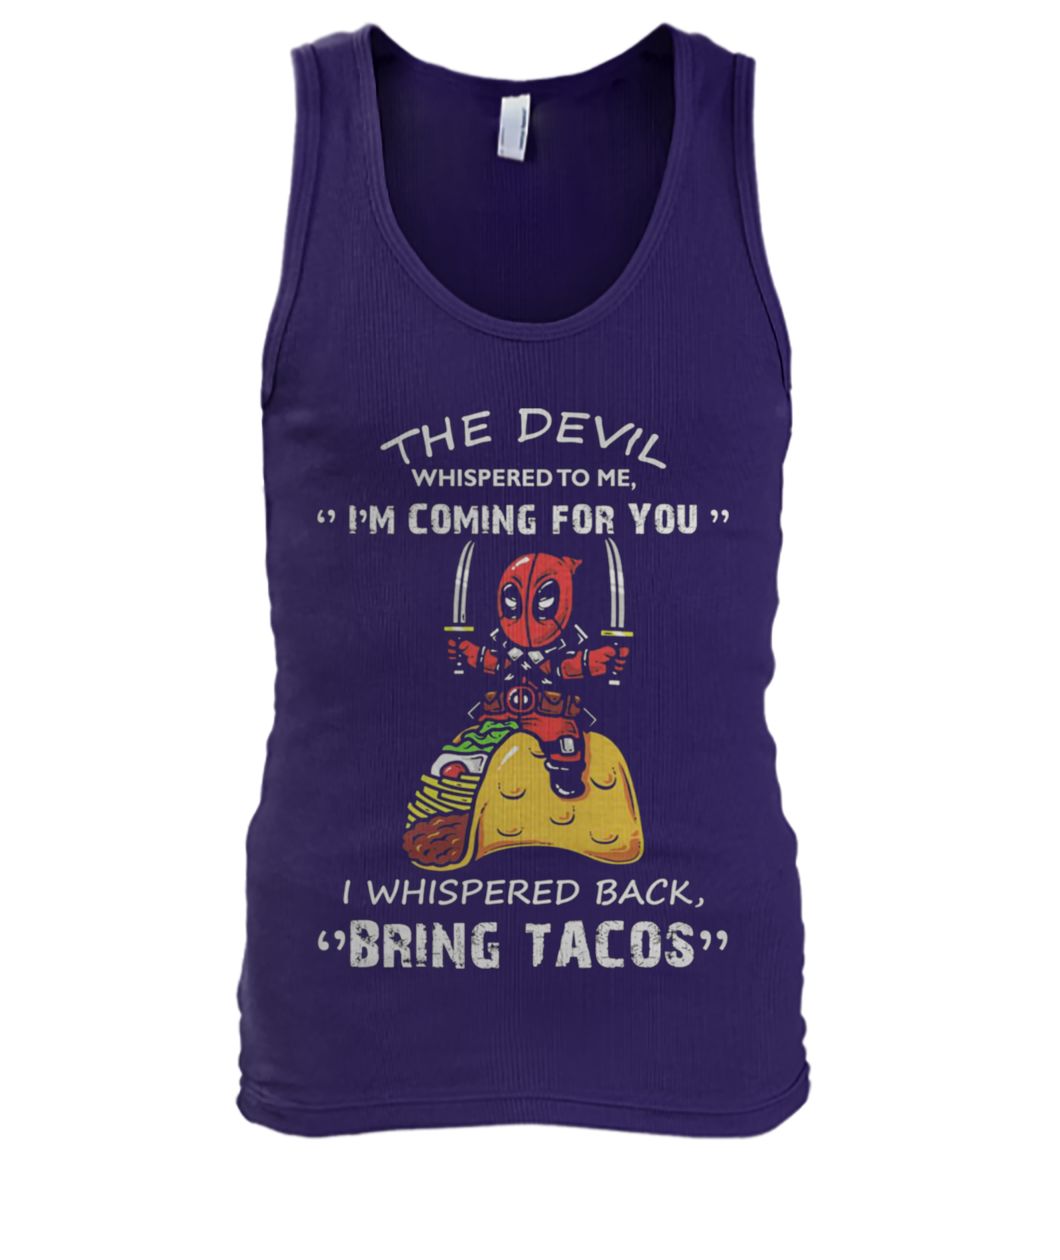 Deadpool the devil whispered to me I’m coming for you I whispered back bring tacos men's tank top